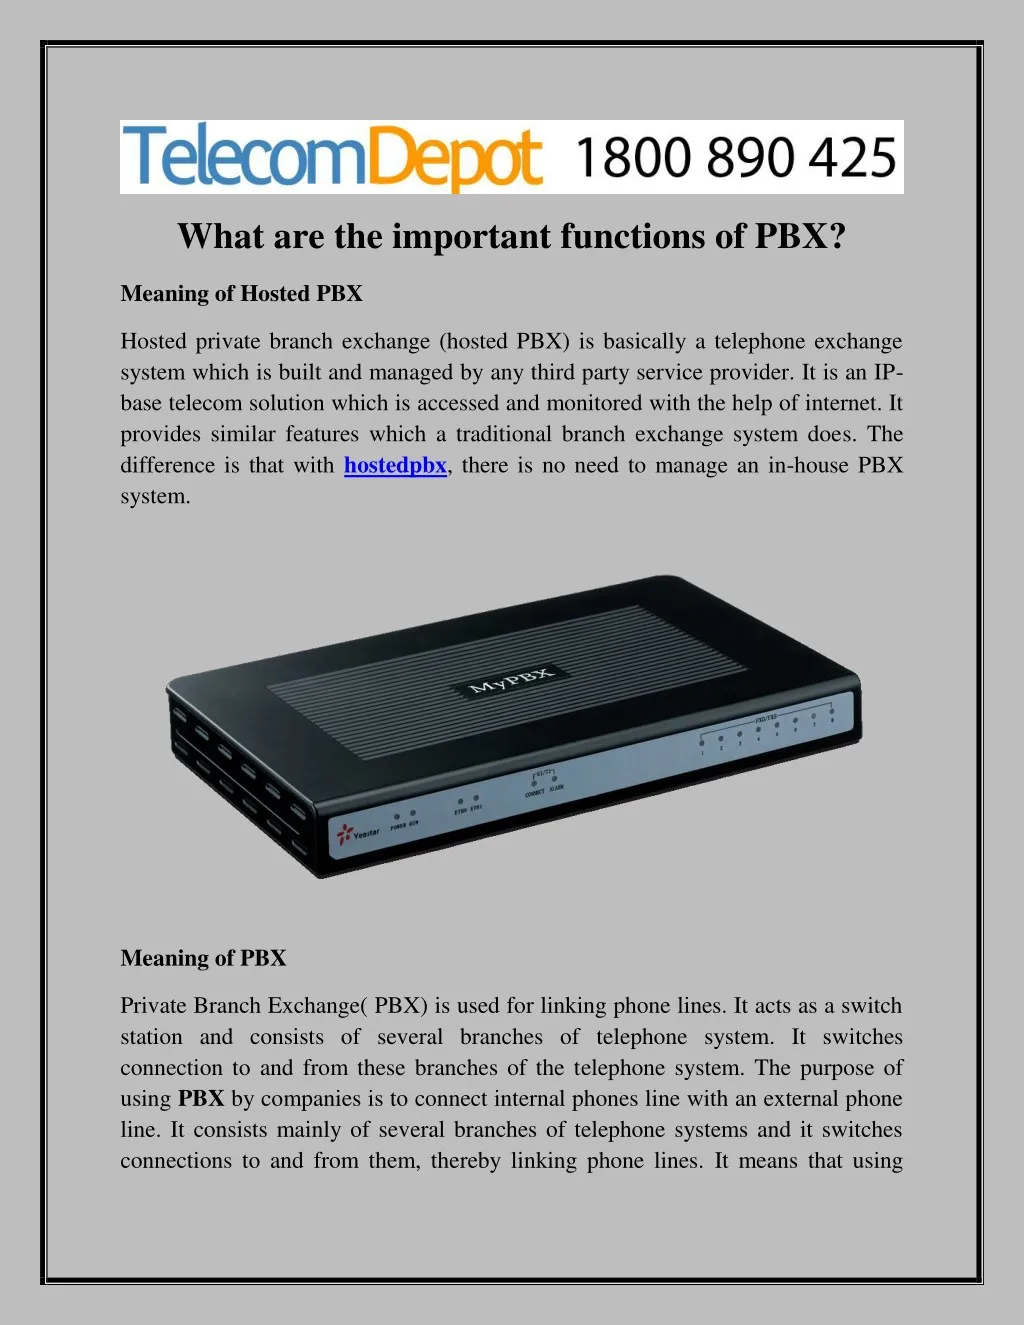 what are the important functions of pbx